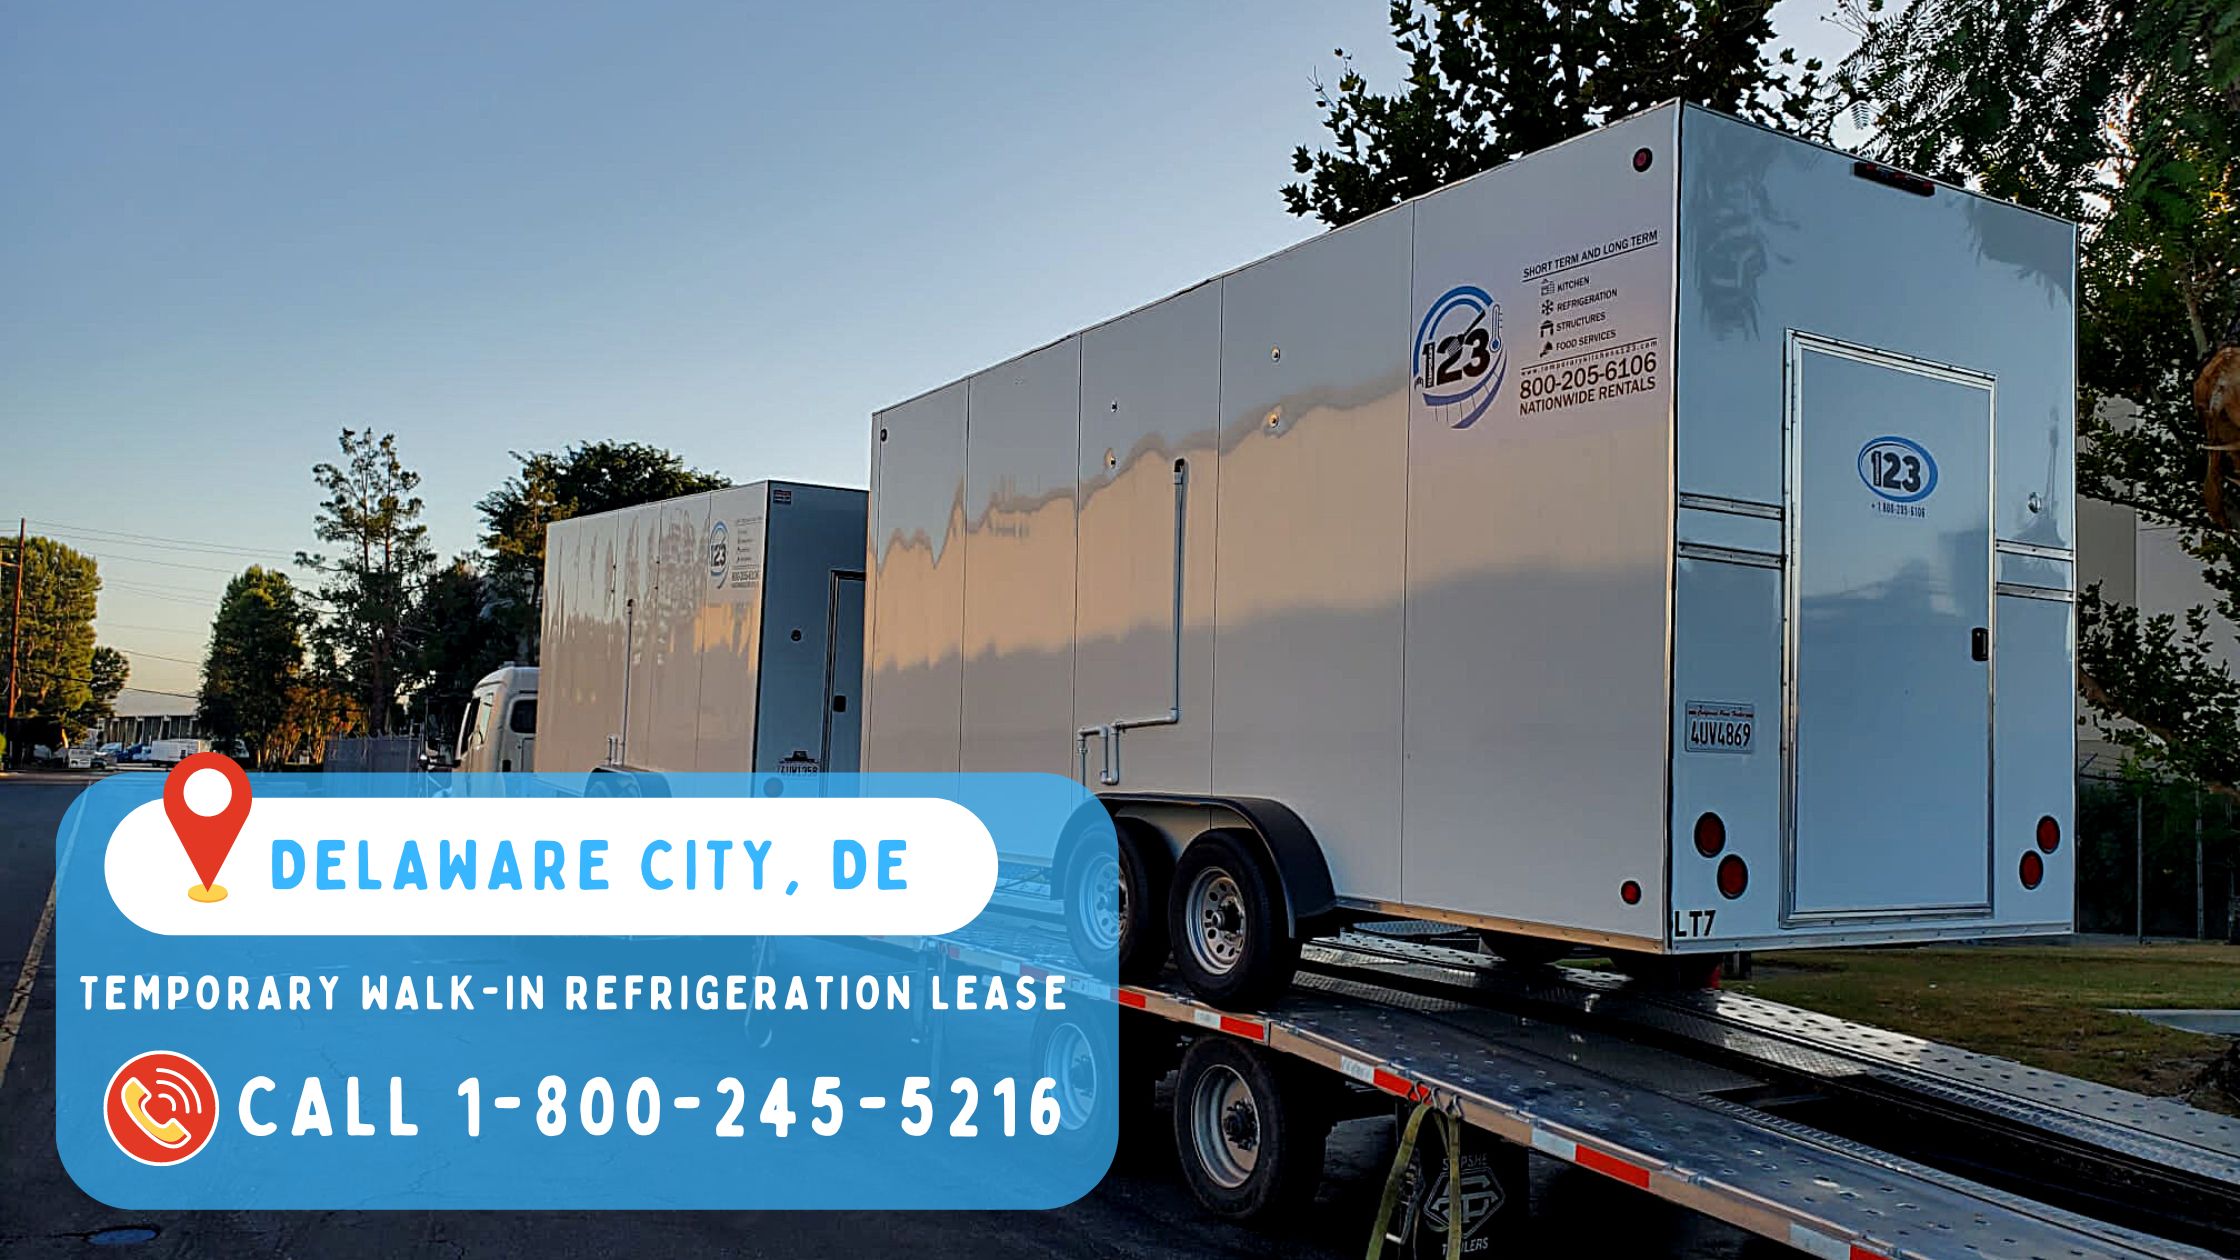 Temporary Walk-In Refrigeration Lease in Delaware City